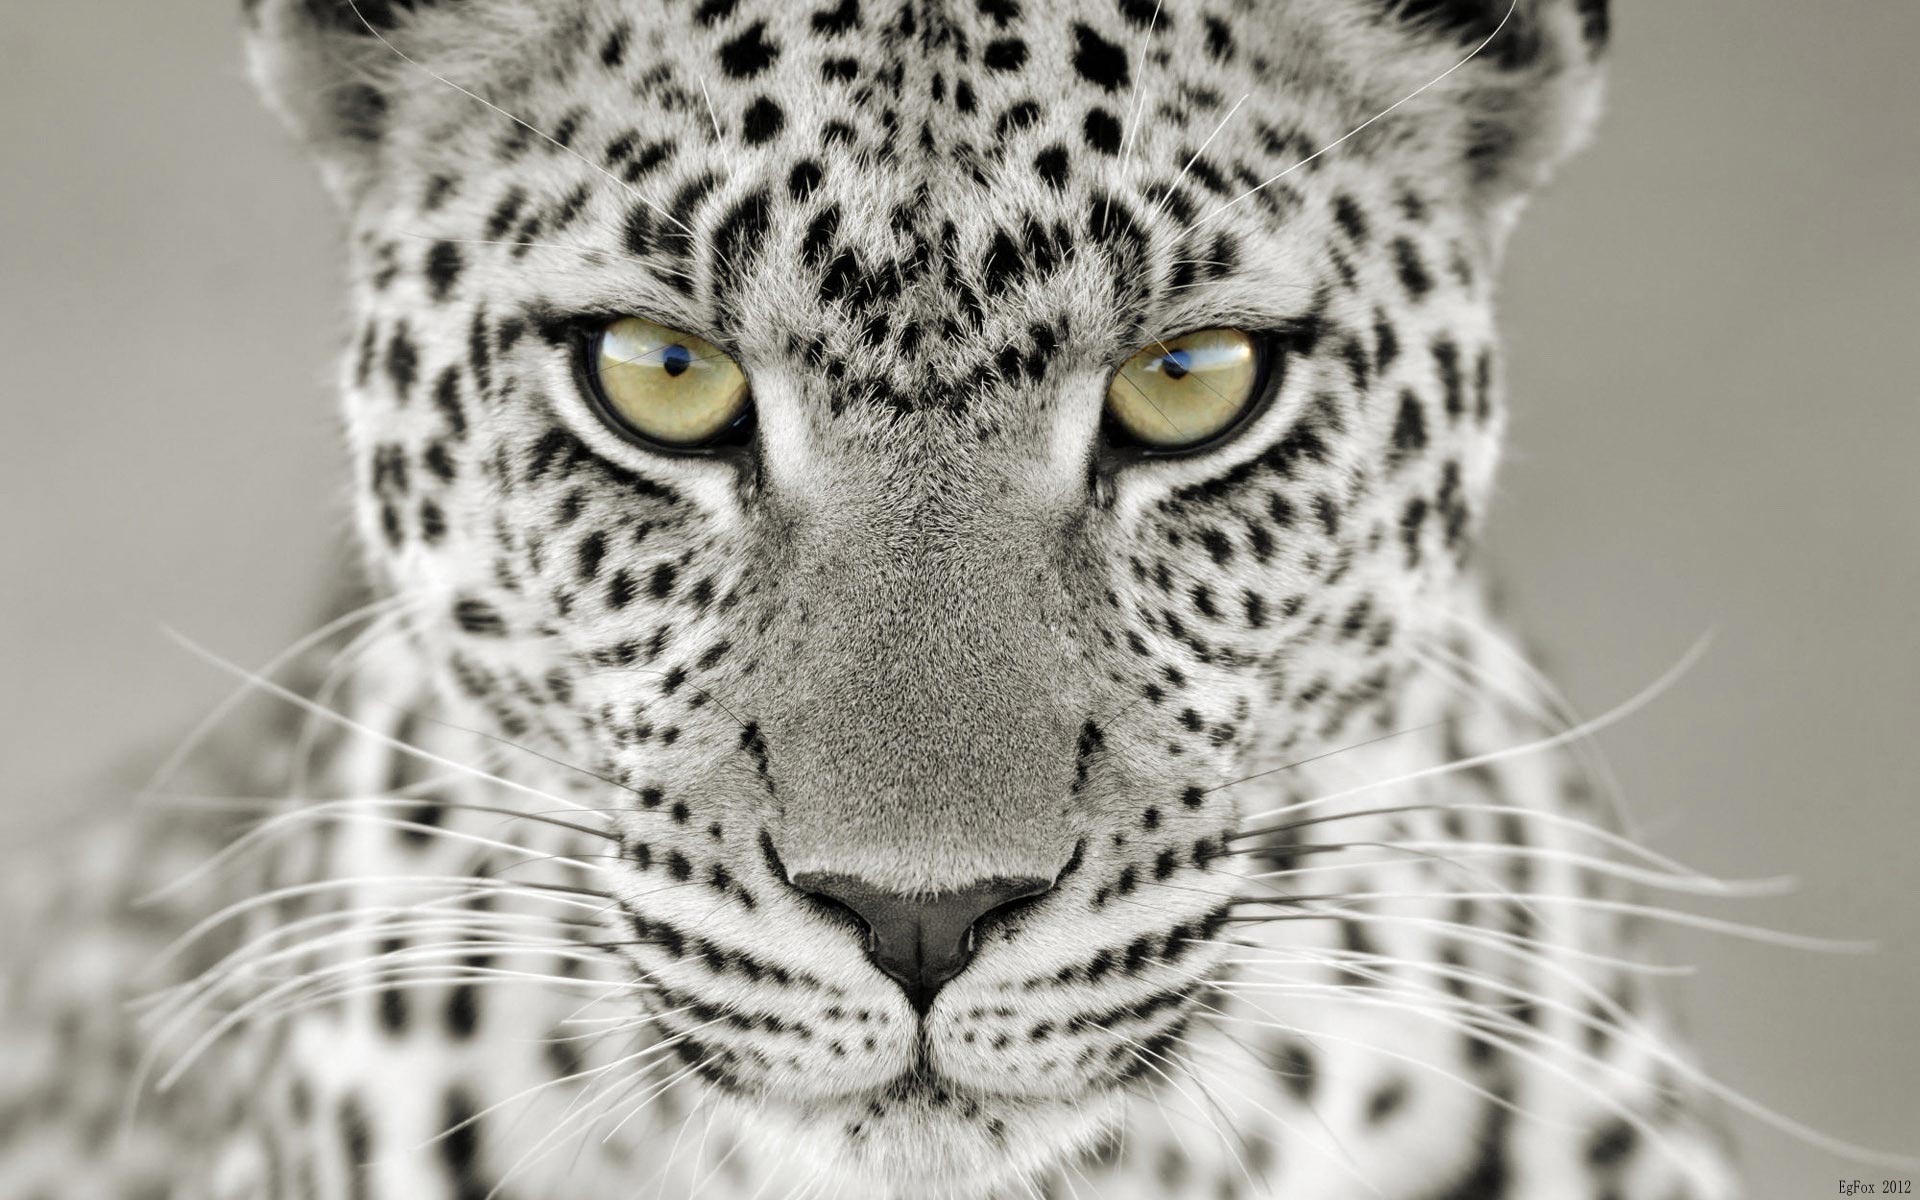 Snow Leopard Wallpaper HD For Htc First New Phone